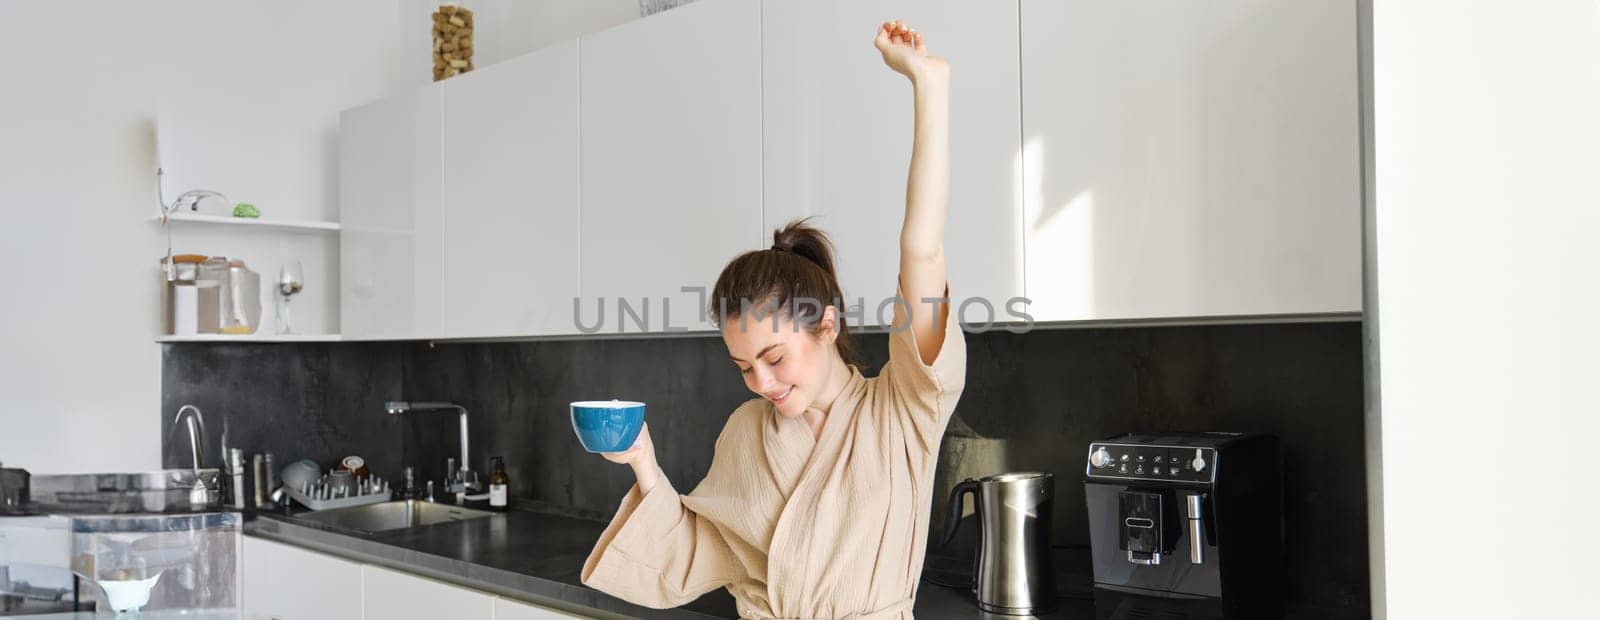 Portrait of happy girl dancing with coffee in the kitchen, wearing bathrobe, enjoying her morning routine.